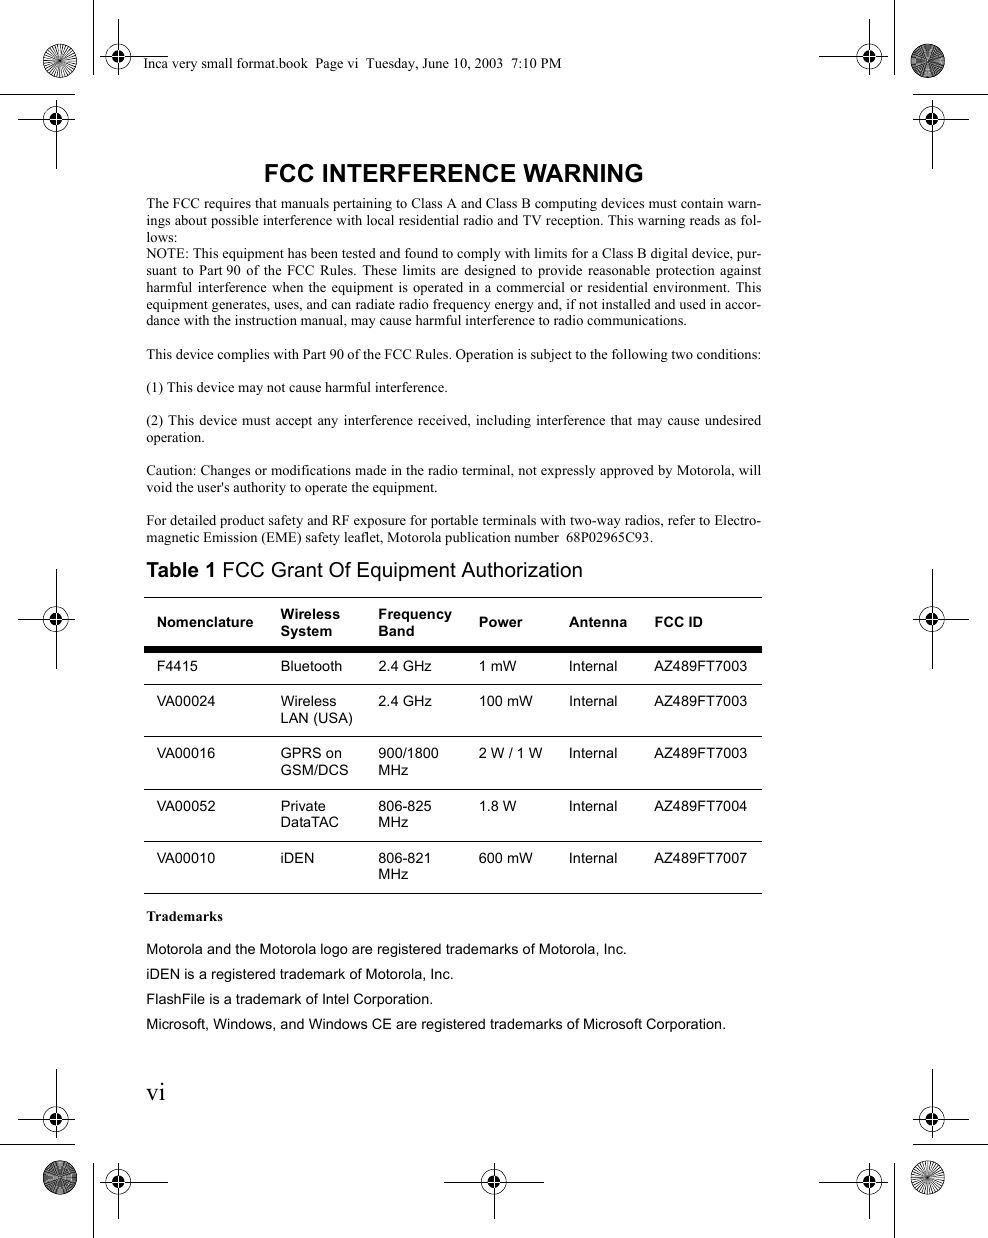 viFCC INTERFERENCE WARNINGThe FCC requires that manuals pertaining to Class A and Class B computing devices must contain warn-ings about possible interference with local residential radio and TV reception. This warning reads as fol-lows:NOTE: This equipment has been tested and found to comply with limits for a Class B digital device, pur-suant to Part 90 of the FCC Rules. These limits are designed to provide reasonable protection againstharmful interference when the equipment is operated in a commercial or residential environment. Thisequipment generates, uses, and can radiate radio frequency energy and, if not installed and used in accor-dance with the instruction manual, may cause harmful interference to radio communications. This device complies with Part 90 of the FCC Rules. Operation is subject to the following two conditions:(1) This device may not cause harmful interference.(2) This device must accept any interference received, including interference that may cause undesiredoperation.Caution: Changes or modifications made in the radio terminal, not expressly approved by Motorola, willvoid the user&apos;s authority to operate the equipment.For detailed product safety and RF exposure for portable terminals with two-way radios, refer to Electro-magnetic Emission (EME) safety leaflet, Motorola publication number  68P02965C93.TrademarksMotorola and the Motorola logo are registered trademarks of Motorola, Inc. iDEN is a registered trademark of Motorola, Inc.FlashFile is a trademark of Intel Corporation.Microsoft, Windows, and Windows CE are registered trademarks of Microsoft Corporation.Table 1 FCC Grant Of Equipment AuthorizationNomenclature Wireless SystemFrequency Band Power Antenna FCC IDF4415 Bluetooth 2.4 GHz 1 mW Internal AZ489FT7003VA00024 Wireless LAN (USA)2.4 GHz 100 mW Internal AZ489FT7003VA00016 GPRS on GSM/DCS900/1800 MHz2 W / 1 W Internal AZ489FT7003VA00052 Private DataTAC806-825 MHz1.8 W Internal AZ489FT7004VA00010 iDEN 806-821 MHz600 mW Internal AZ489FT7007Inca very small format.book  Page vi  Tuesday, June 10, 2003  7:10 PM